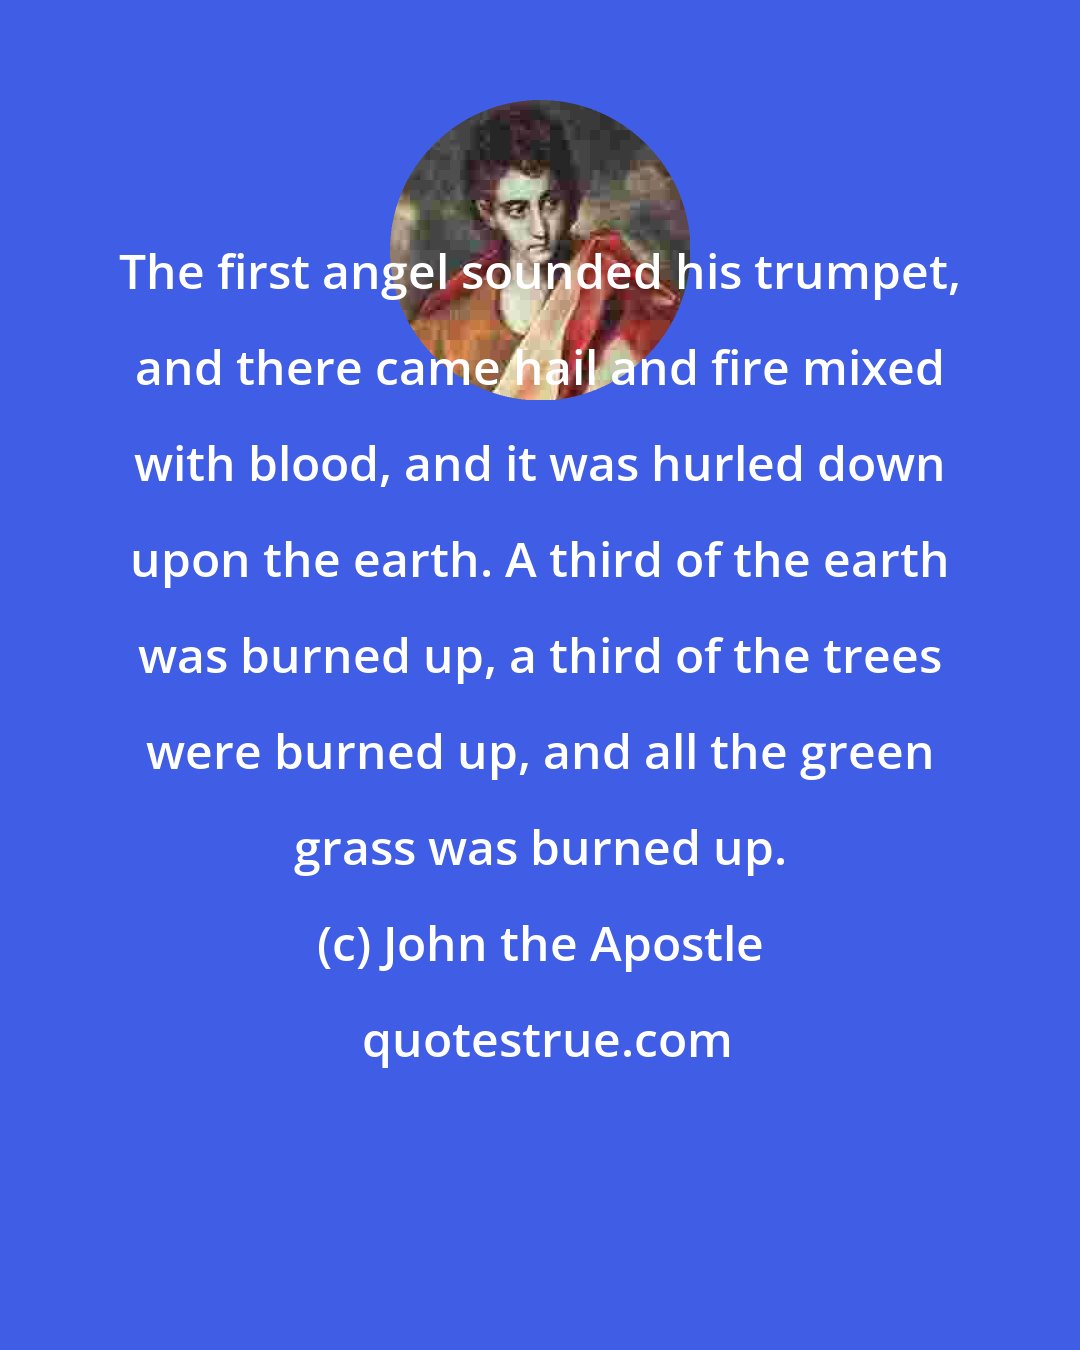 John the Apostle: The first angel sounded his trumpet, and there came hail and fire mixed with blood, and it was hurled down upon the earth. A third of the earth was burned up, a third of the trees were burned up, and all the green grass was burned up.